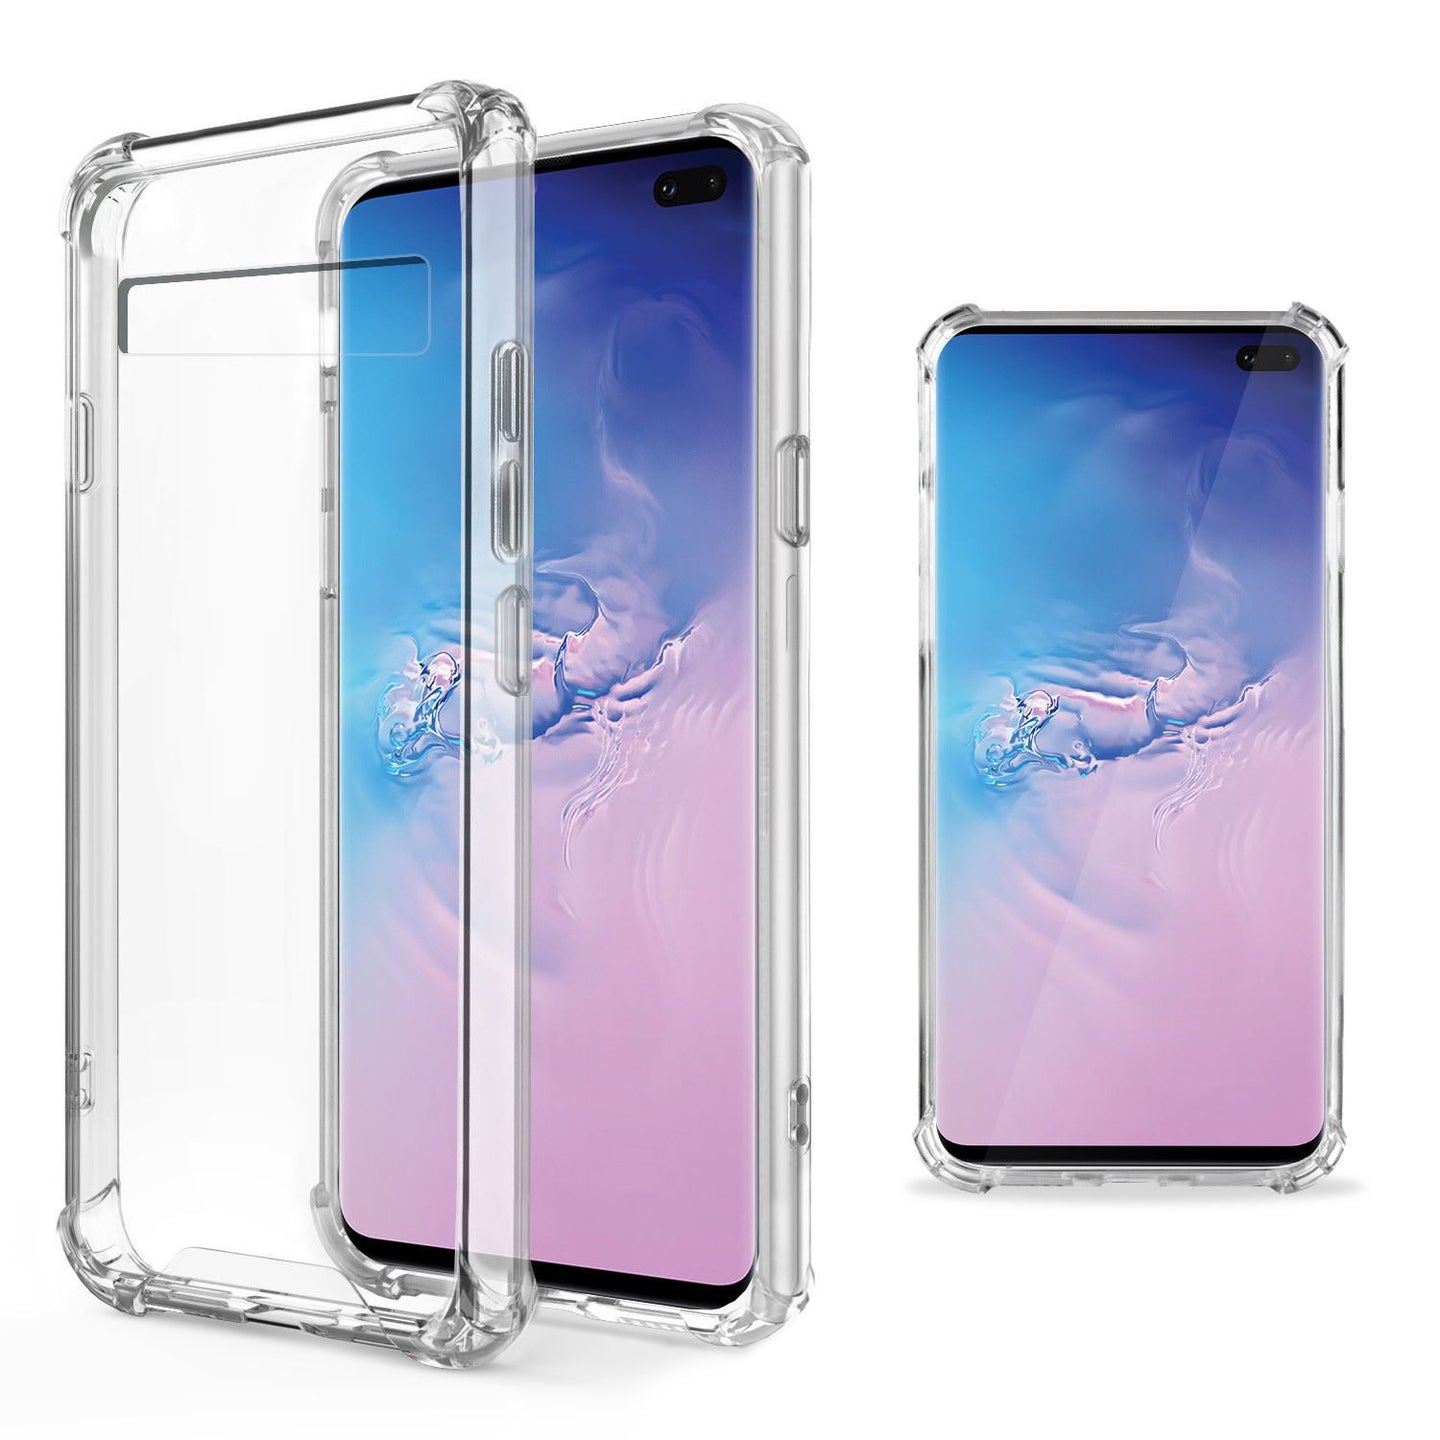 Moozy Shock Proof Silicone Case for Samsung S10 Plus - Transparent Crystal Clear Phone Case Soft TPU Cover